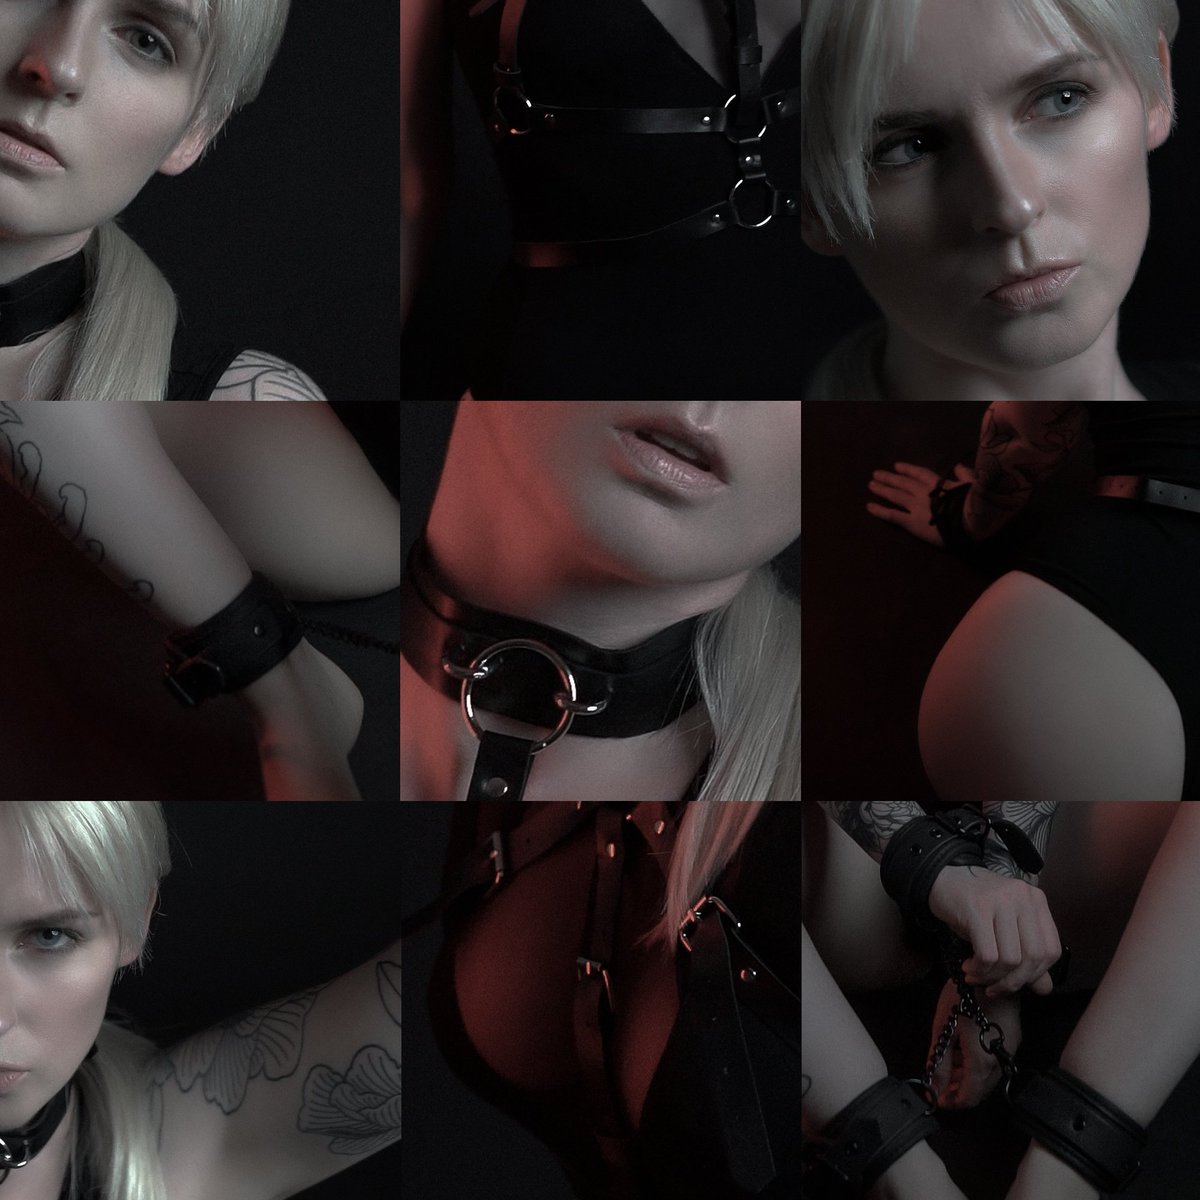 Little collage for the current RE5 Jill Valentine set 
(aka 'just another quick make-up test' shooting to try out my new harnesses😁)

#JillValentine #RE5 #ResidentEvil #REBHFun #Wesker #Weskertine